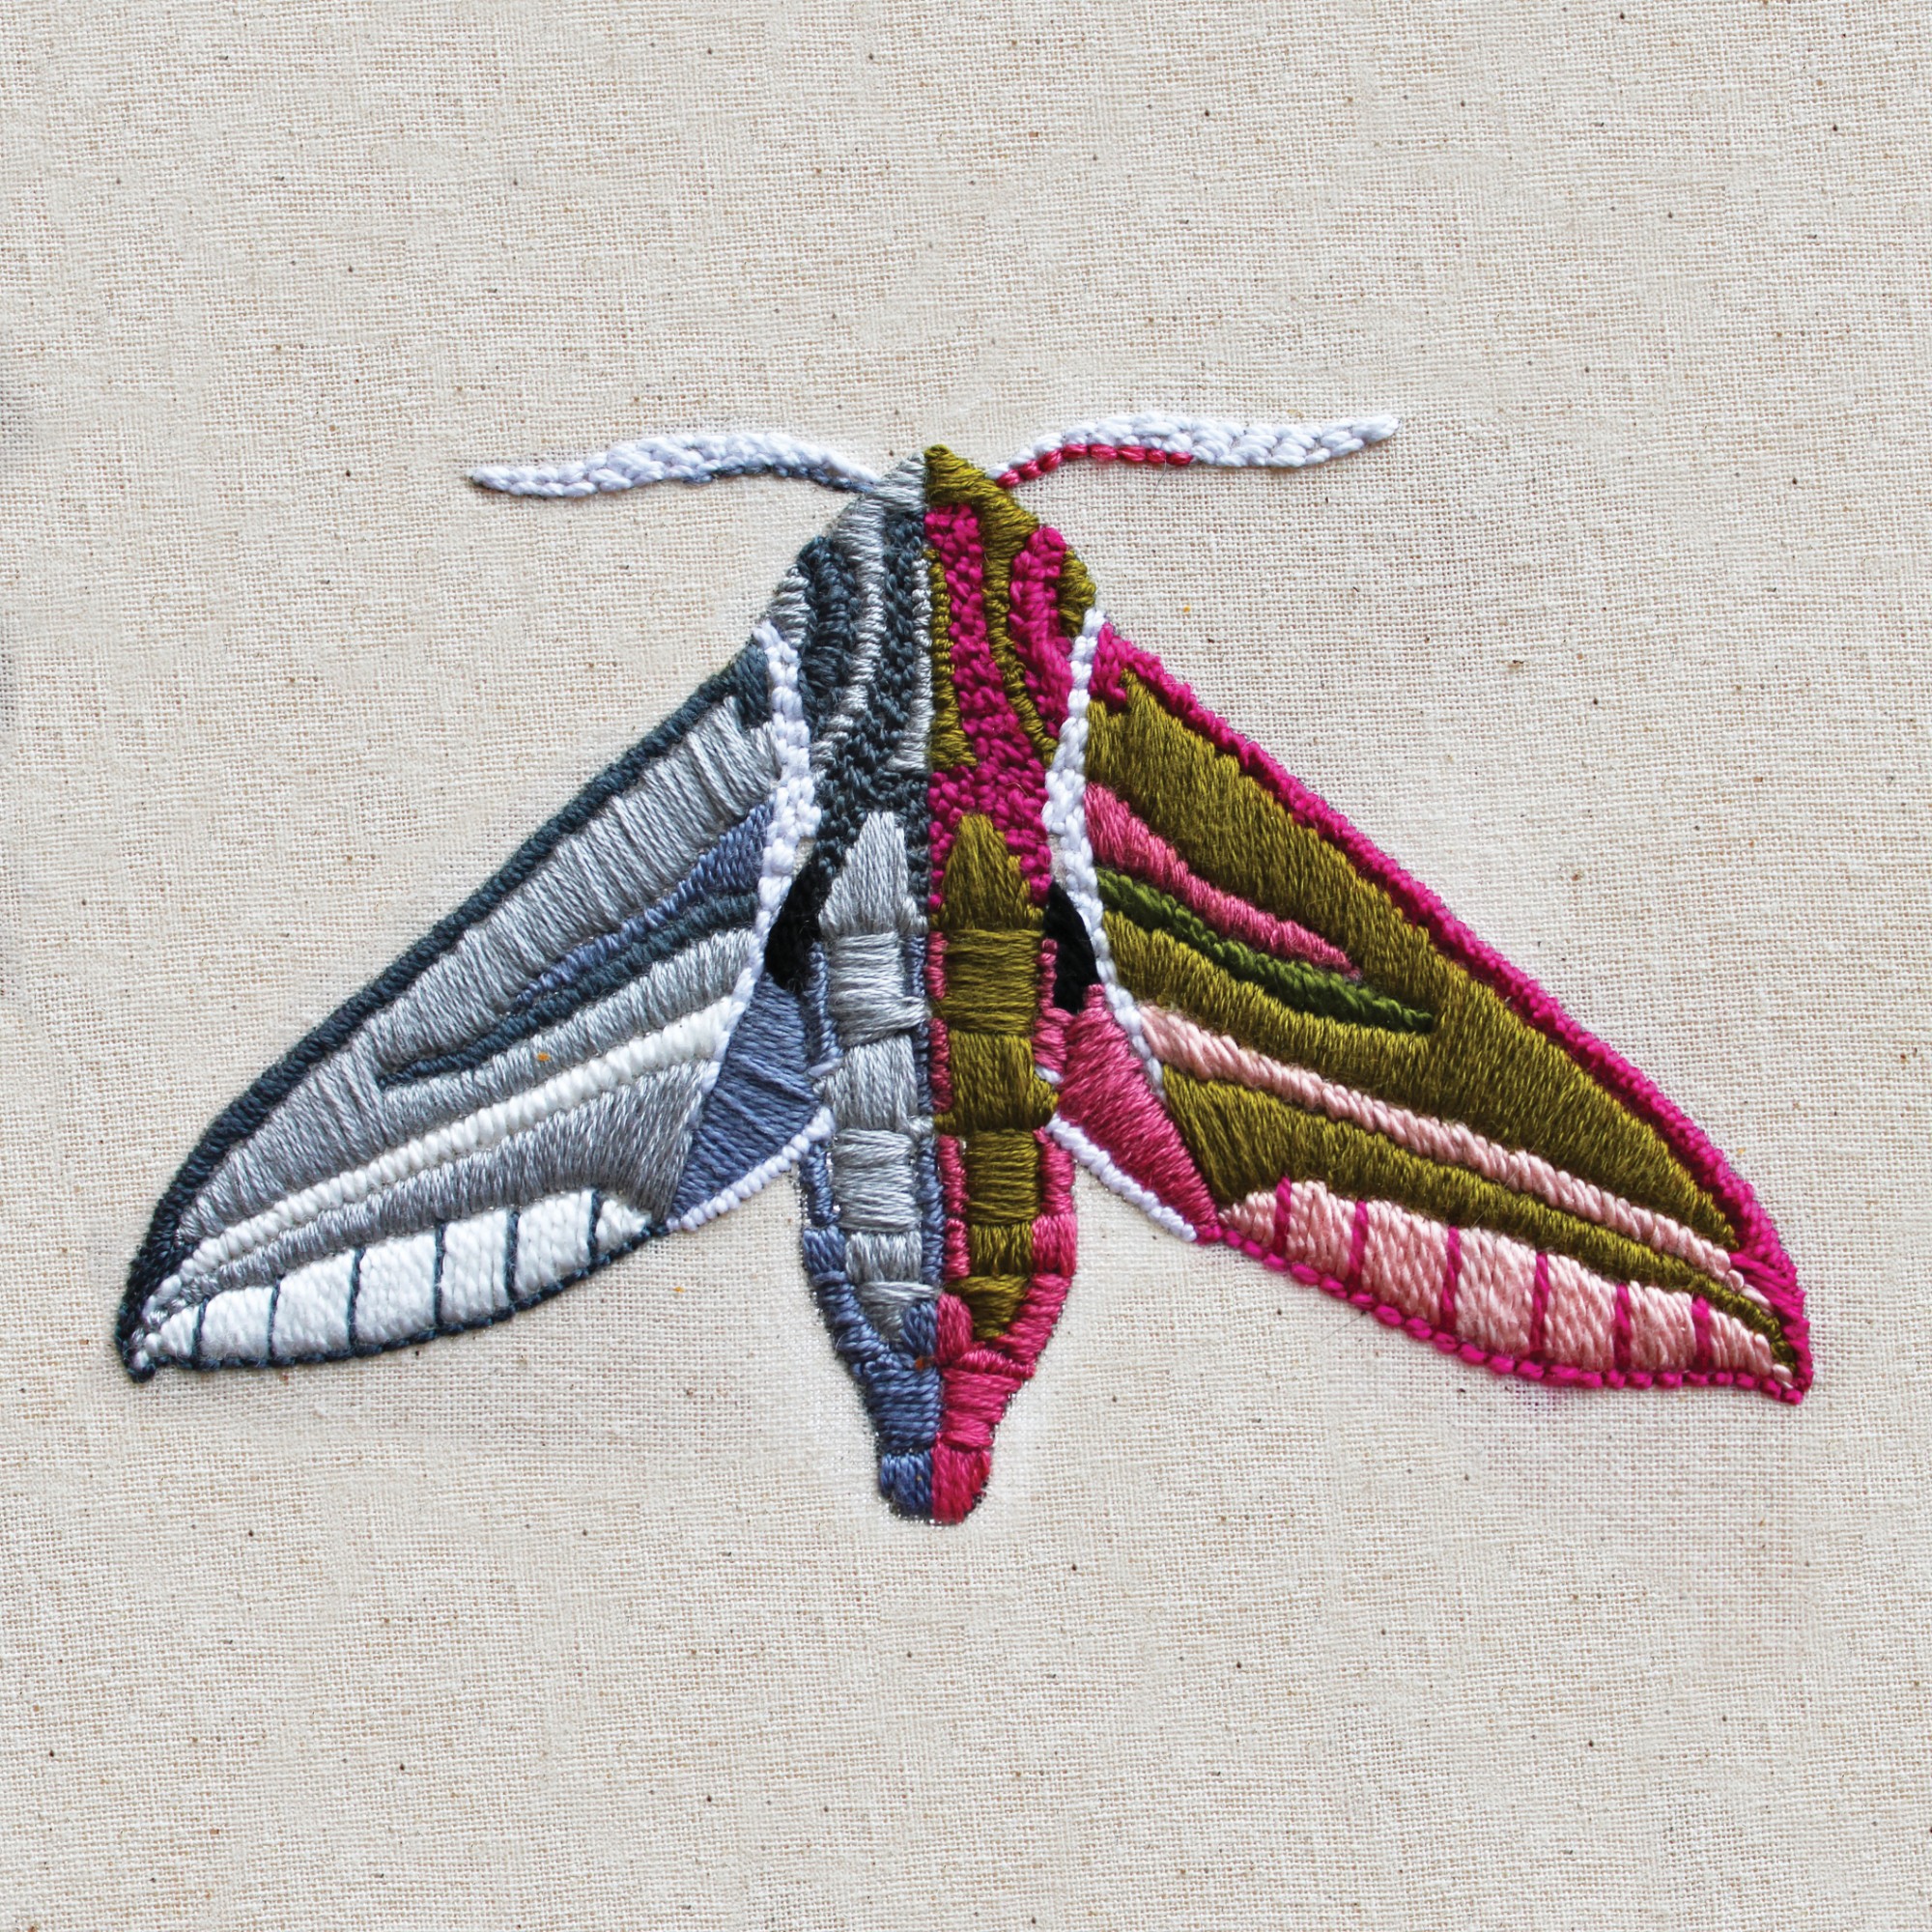 This Elephant Hawk Moth is one of a set of moths I embroidered, half in colour and half in black and white which were inspired by a case study from the book, The Man Who Mistook His Wife for A Hat by Oliver Sacks.